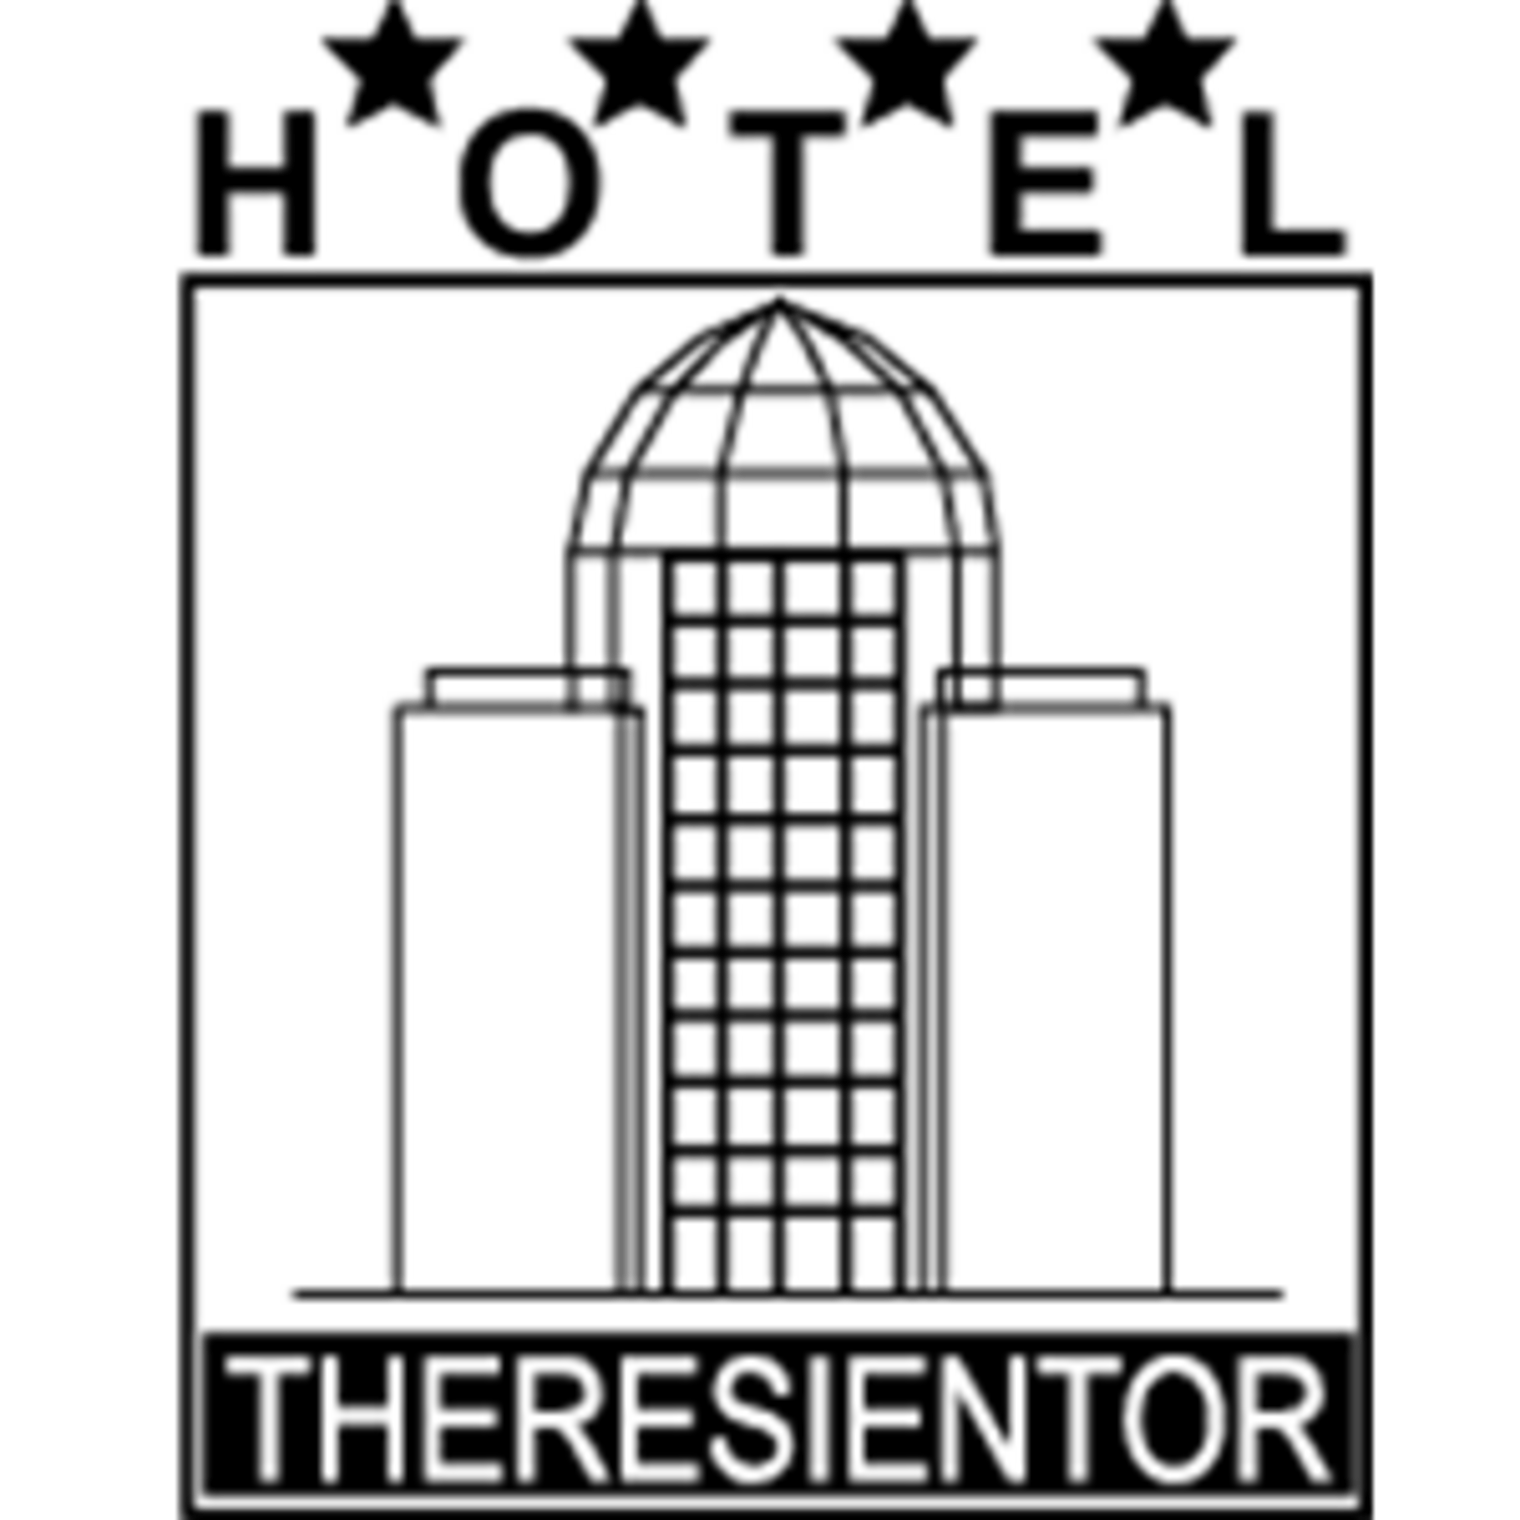 logo-hotel-theresientor-300x300px